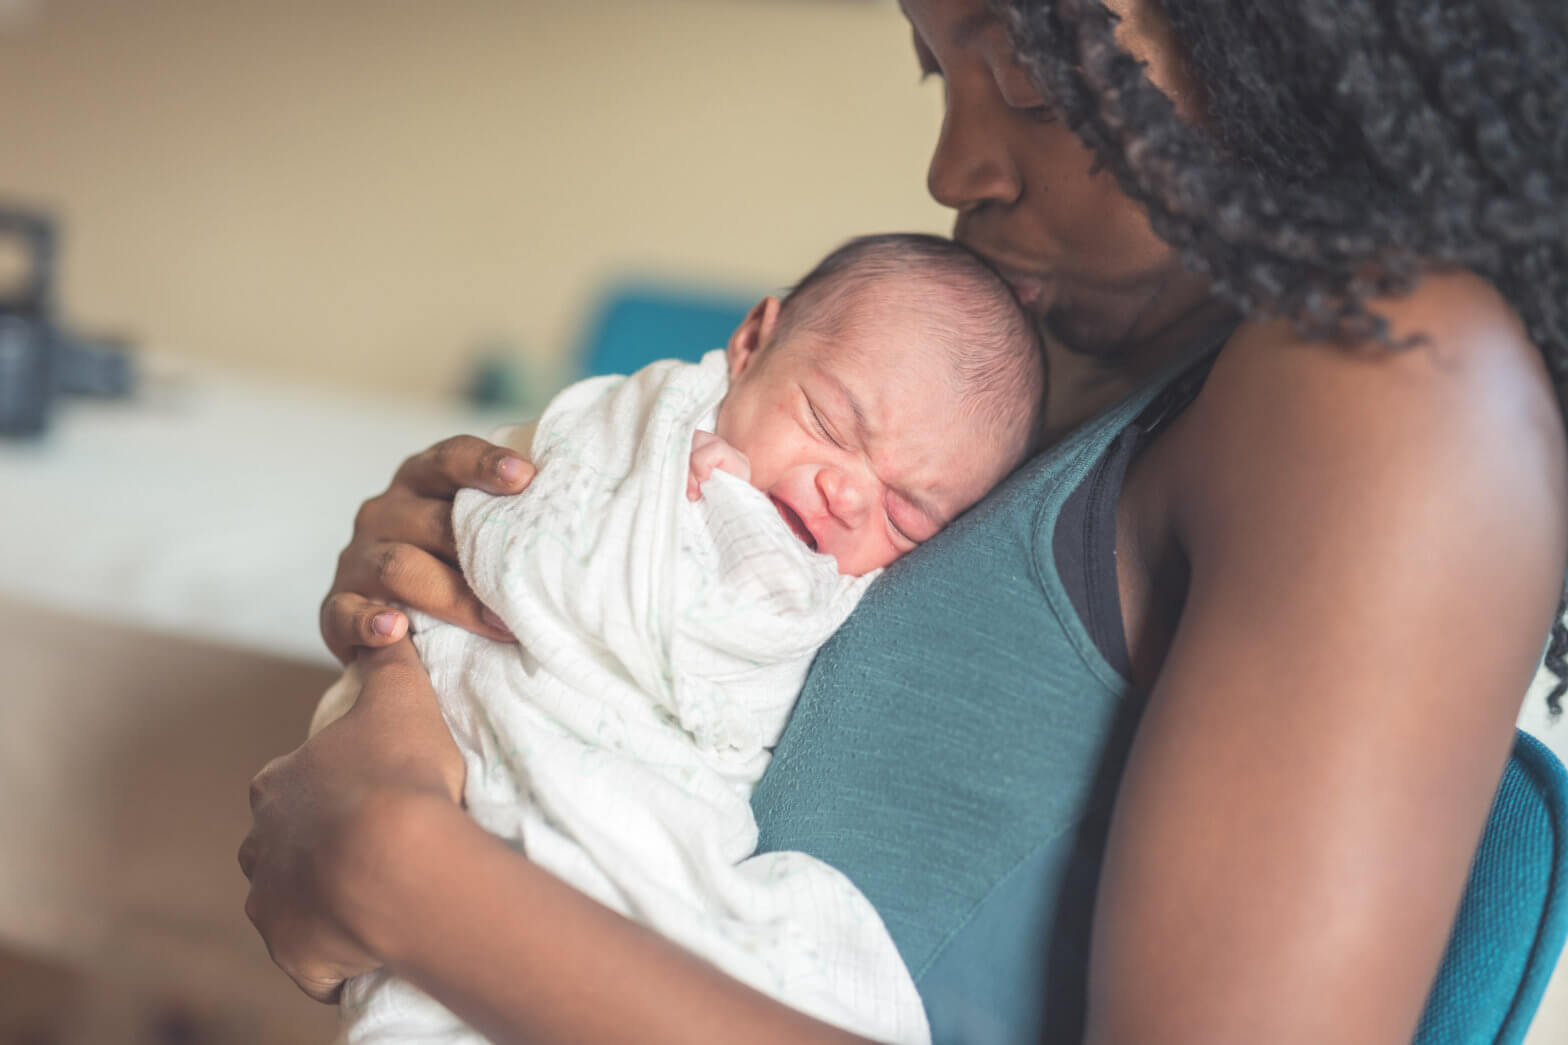 An African American mom gently cradles her newborn daughter against her chest. She is wrapped up and swaddled and is sleeping with a content expression. Mom is tenderly gazing down at her and kissing her head.